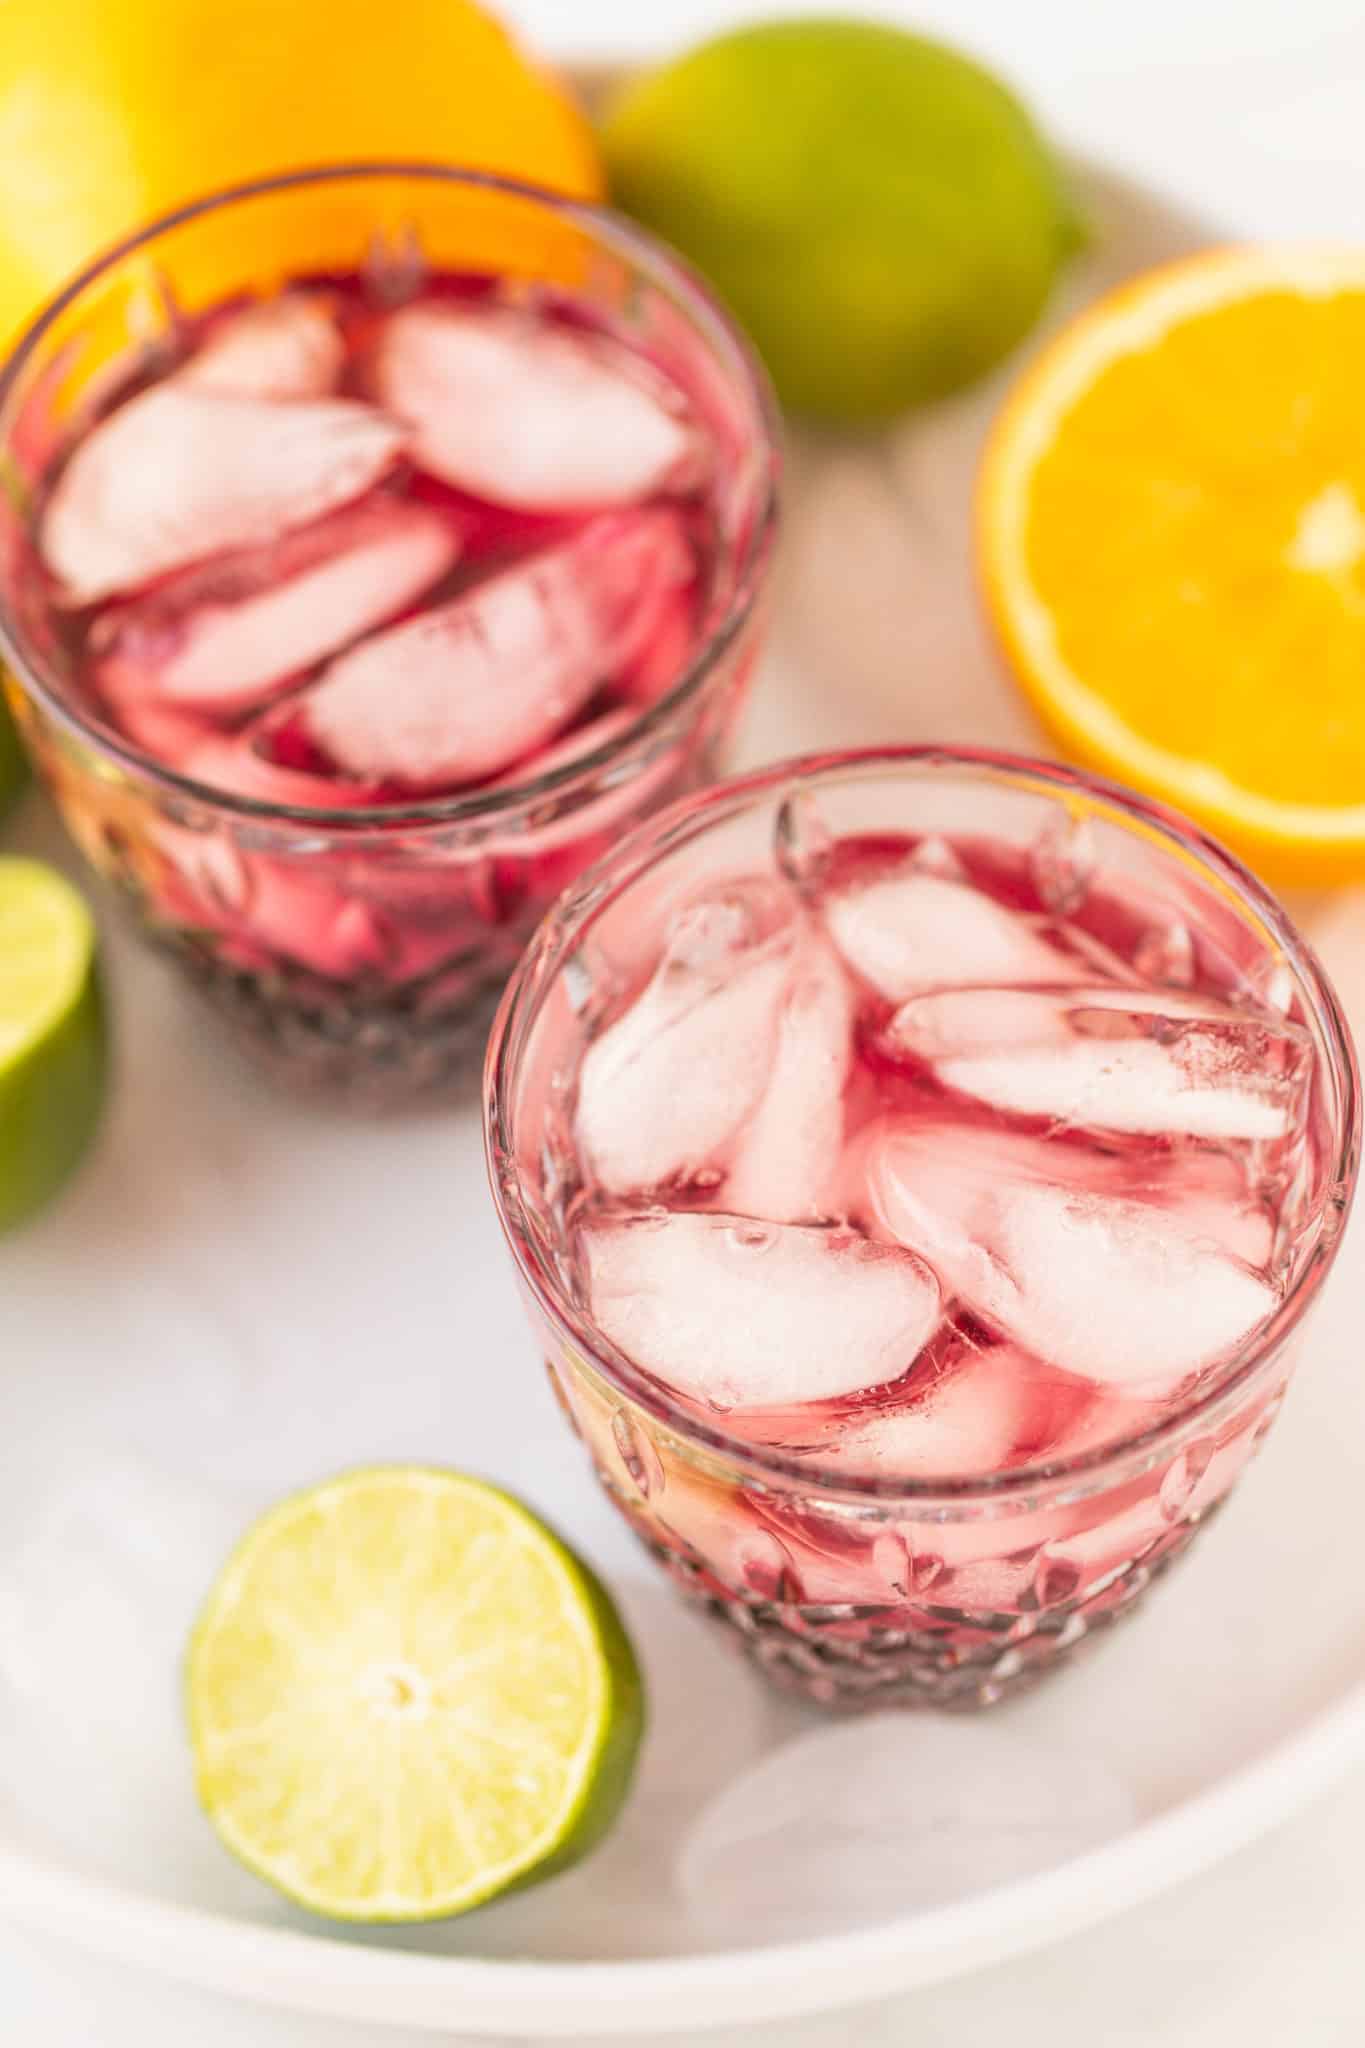 two tart cherry mocktail glasses with ice on a platter with oranges and limes